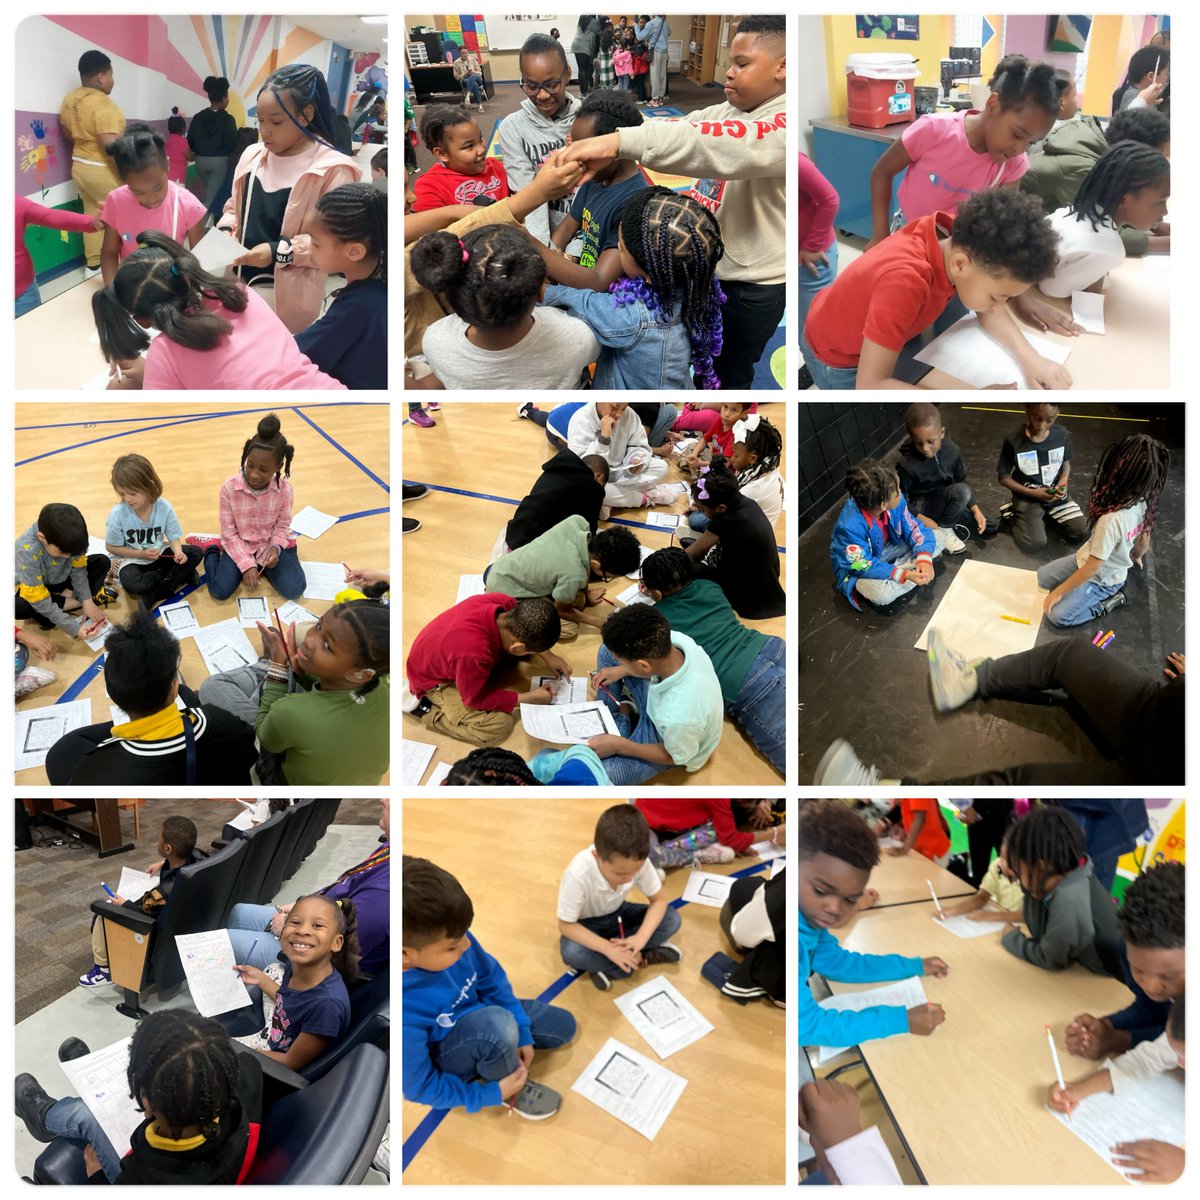 Our students in K-5, collaborated, engaged in team building exercises, & learned about their college house. It was amazing to see students across grade levels join together to build community within their college house. #StudentMentors#AVIDCollegeHouseSystem #BETonJones